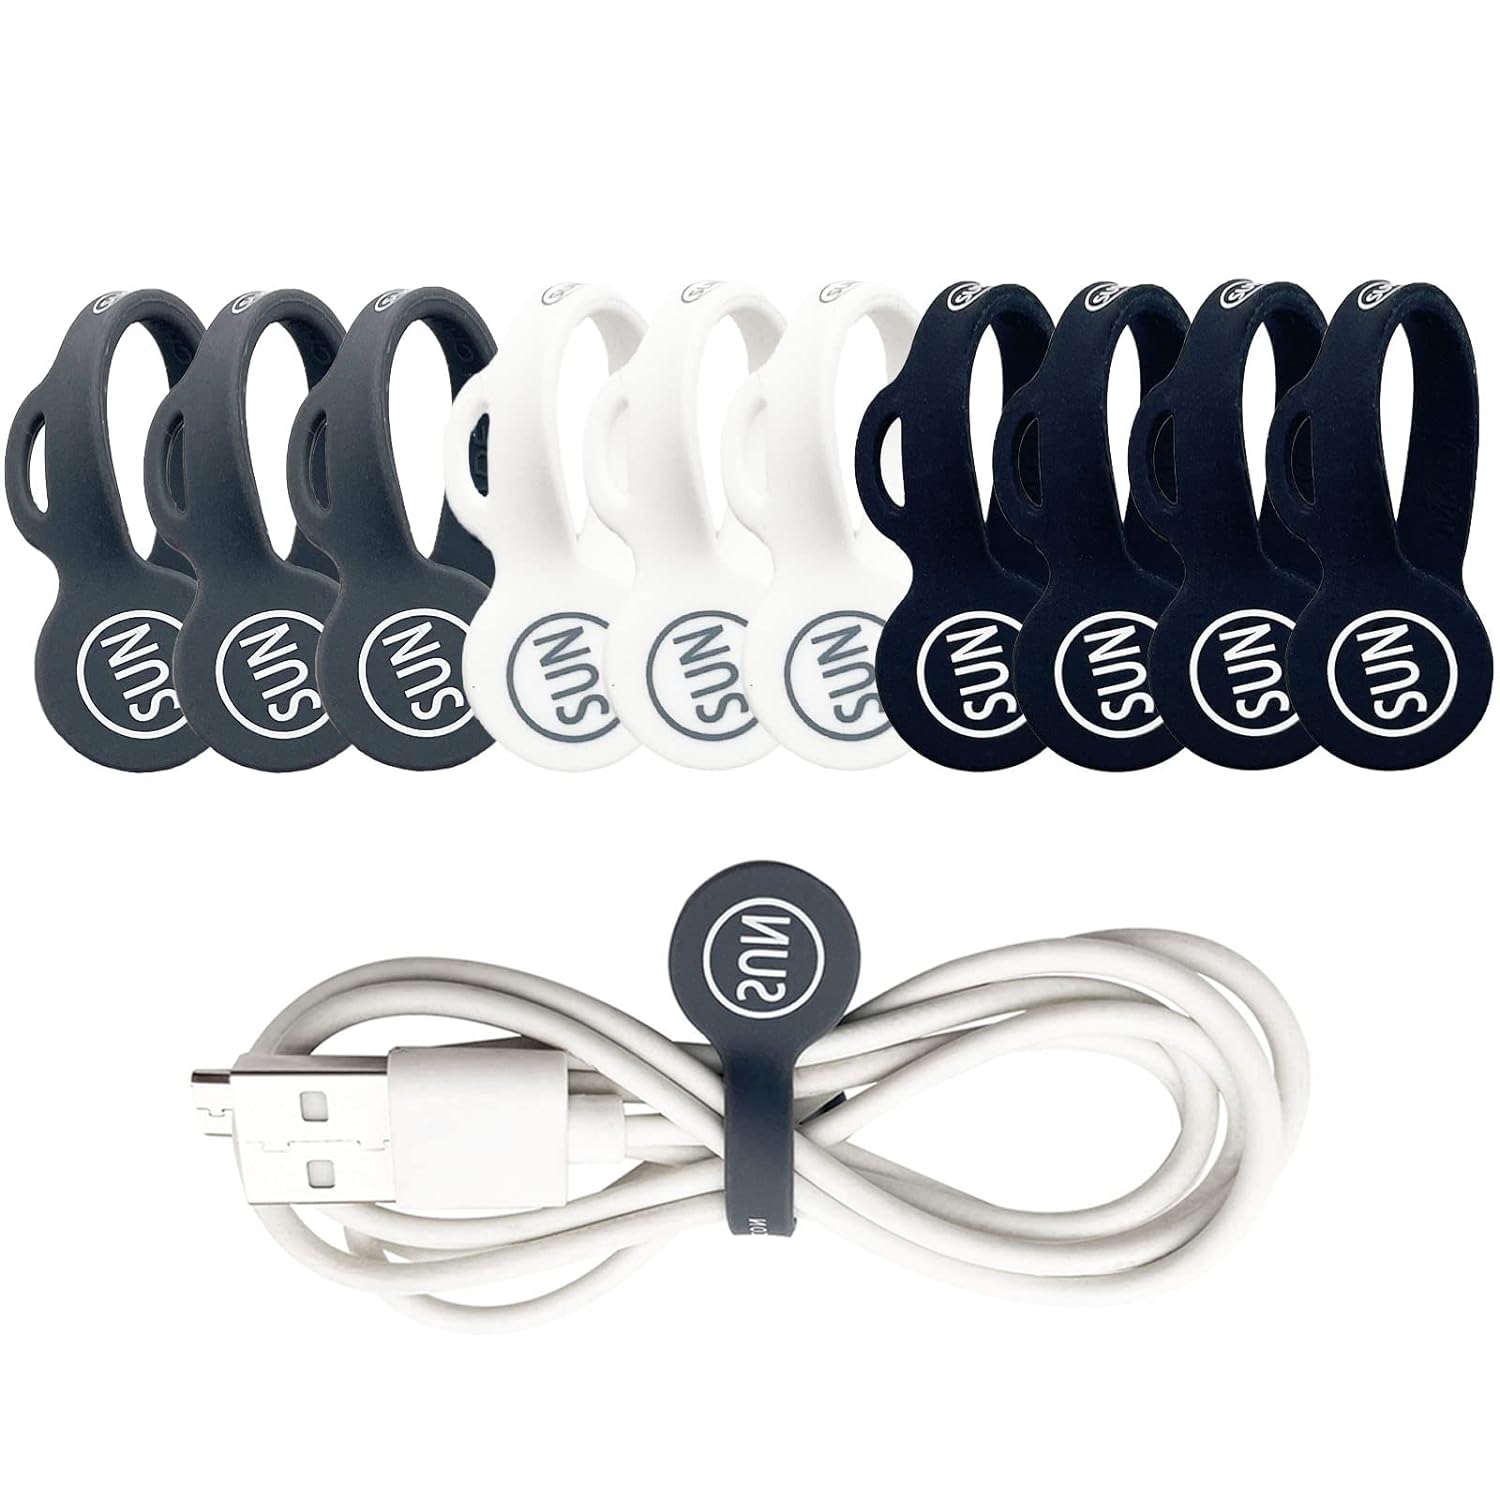 SUNFICON 10 Pack Earbuds Cords Organizers Magnetic Cable Clips Organizers Bookmark Clips Whiteboard Noticeboard Fridge Magnets USB Cable Manager Keeper for Home Kitchen Office School,Gray White Black